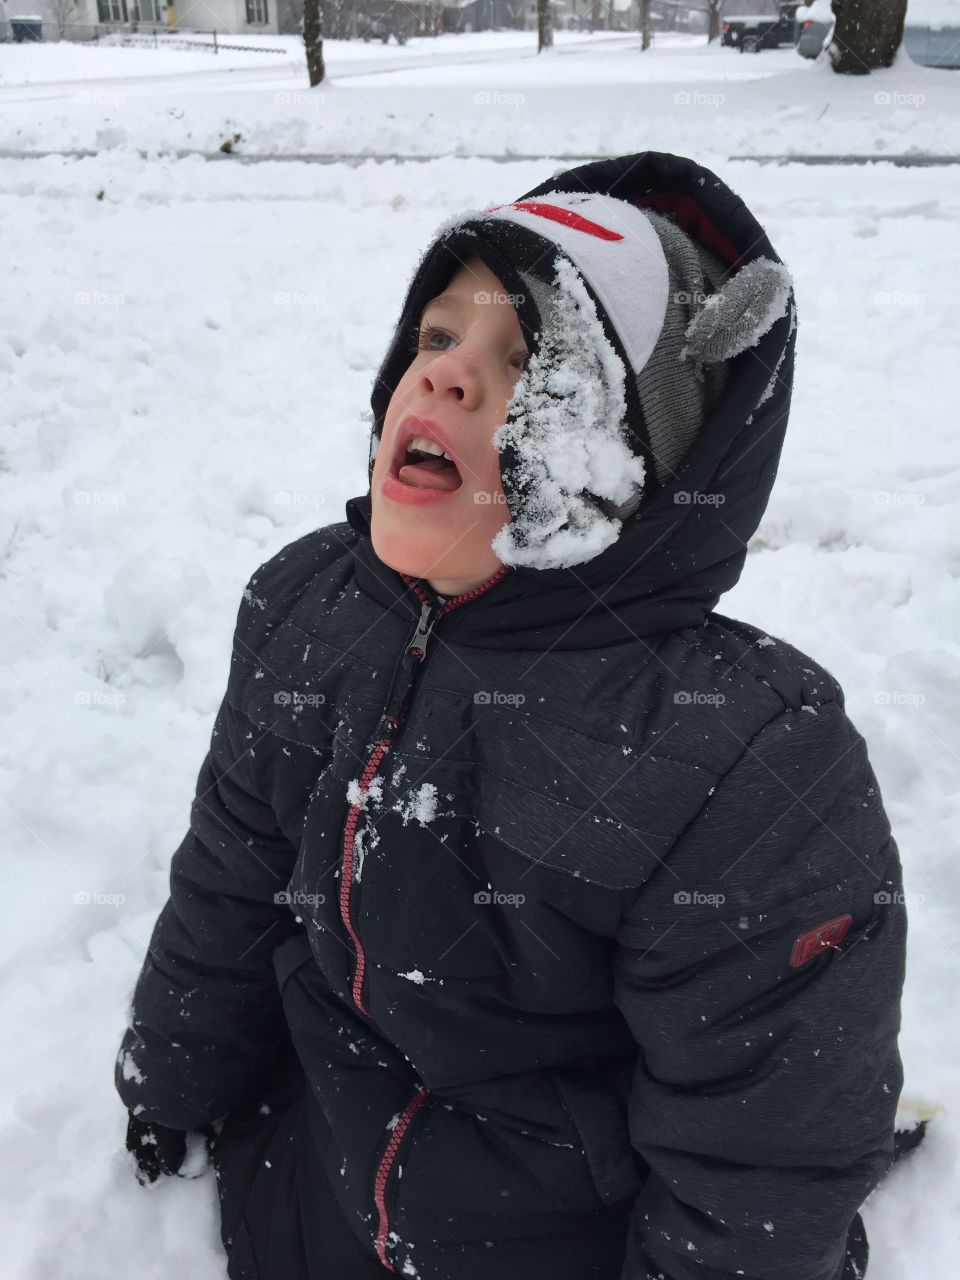 Catching snowflakes 